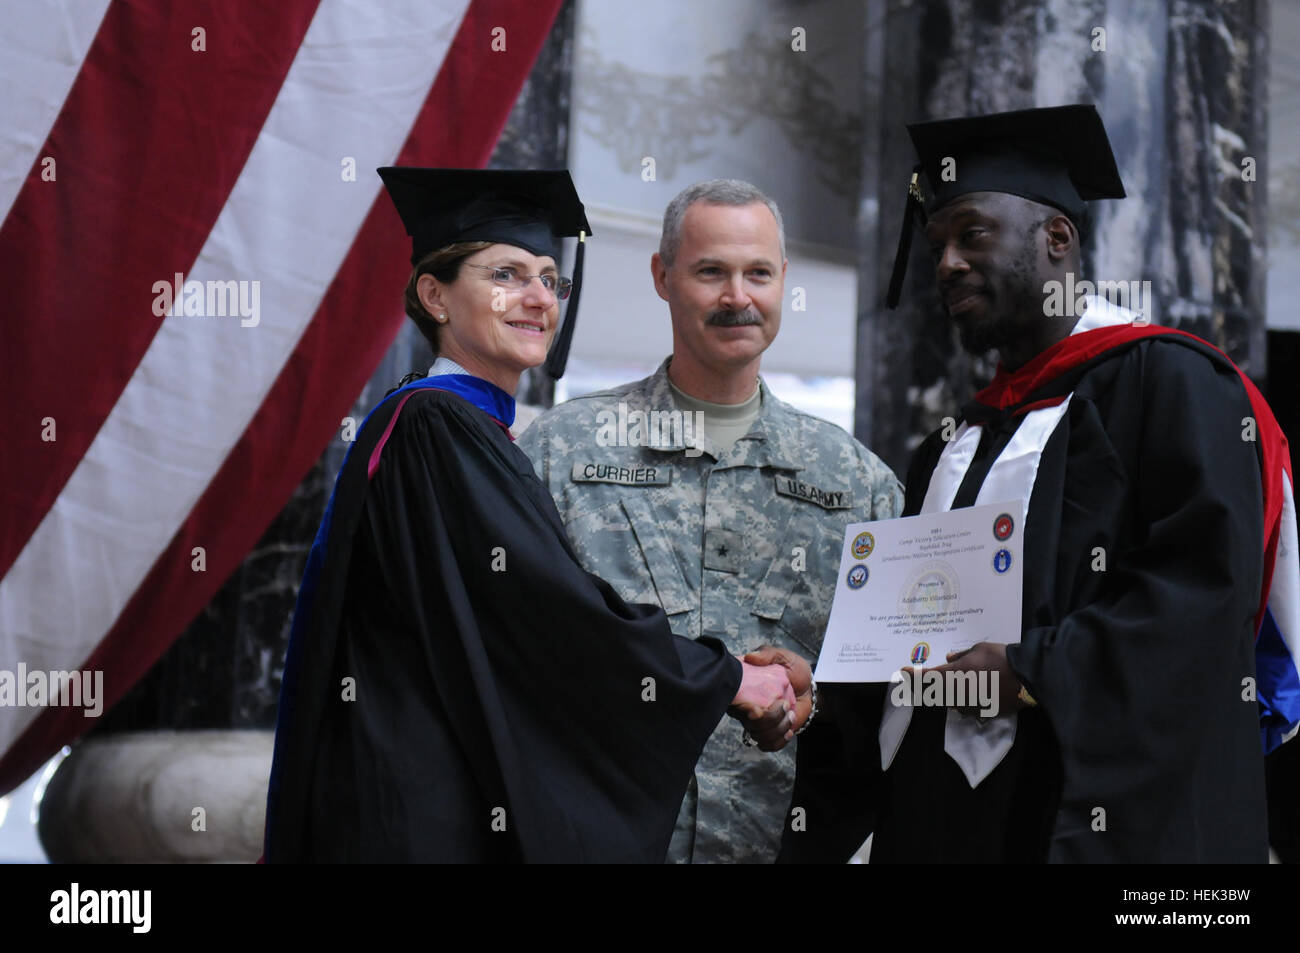 A graduate (right) receives an Embry-Riddle Aeronautical University master of science in safety science education center certificate from Brig. Gen. Donald J. Currier (center), commander of the 49th Military Police Brigade, and Carolyn L. Baker (left), chief of continuing education programs, Office of the Secretary of Defense. Service members graduate while deployed 283580 Stock Photo